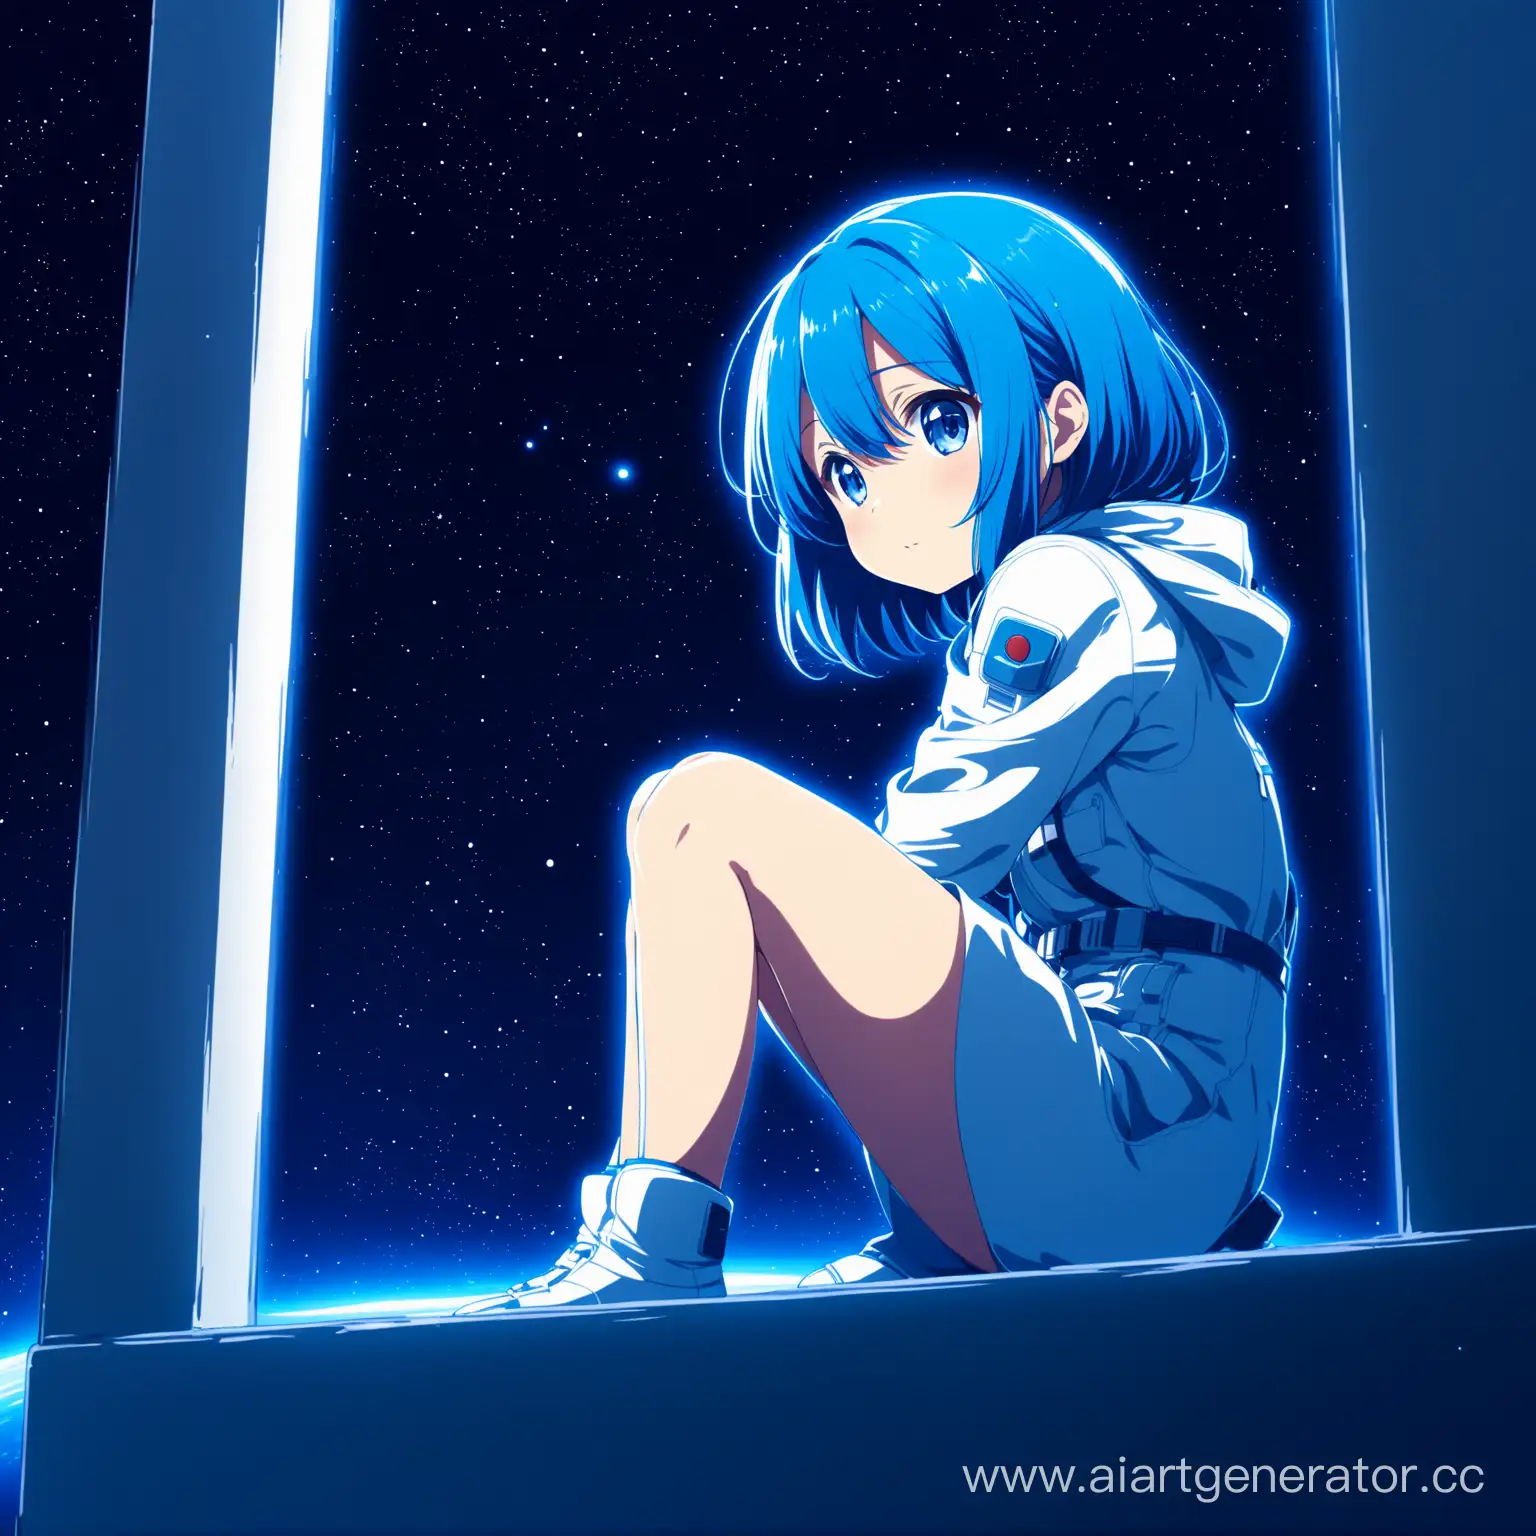 Anime-Girl-Sitting-in-Cosmic-Solitude-Dreamy-Blue-Outlined-Space-Art